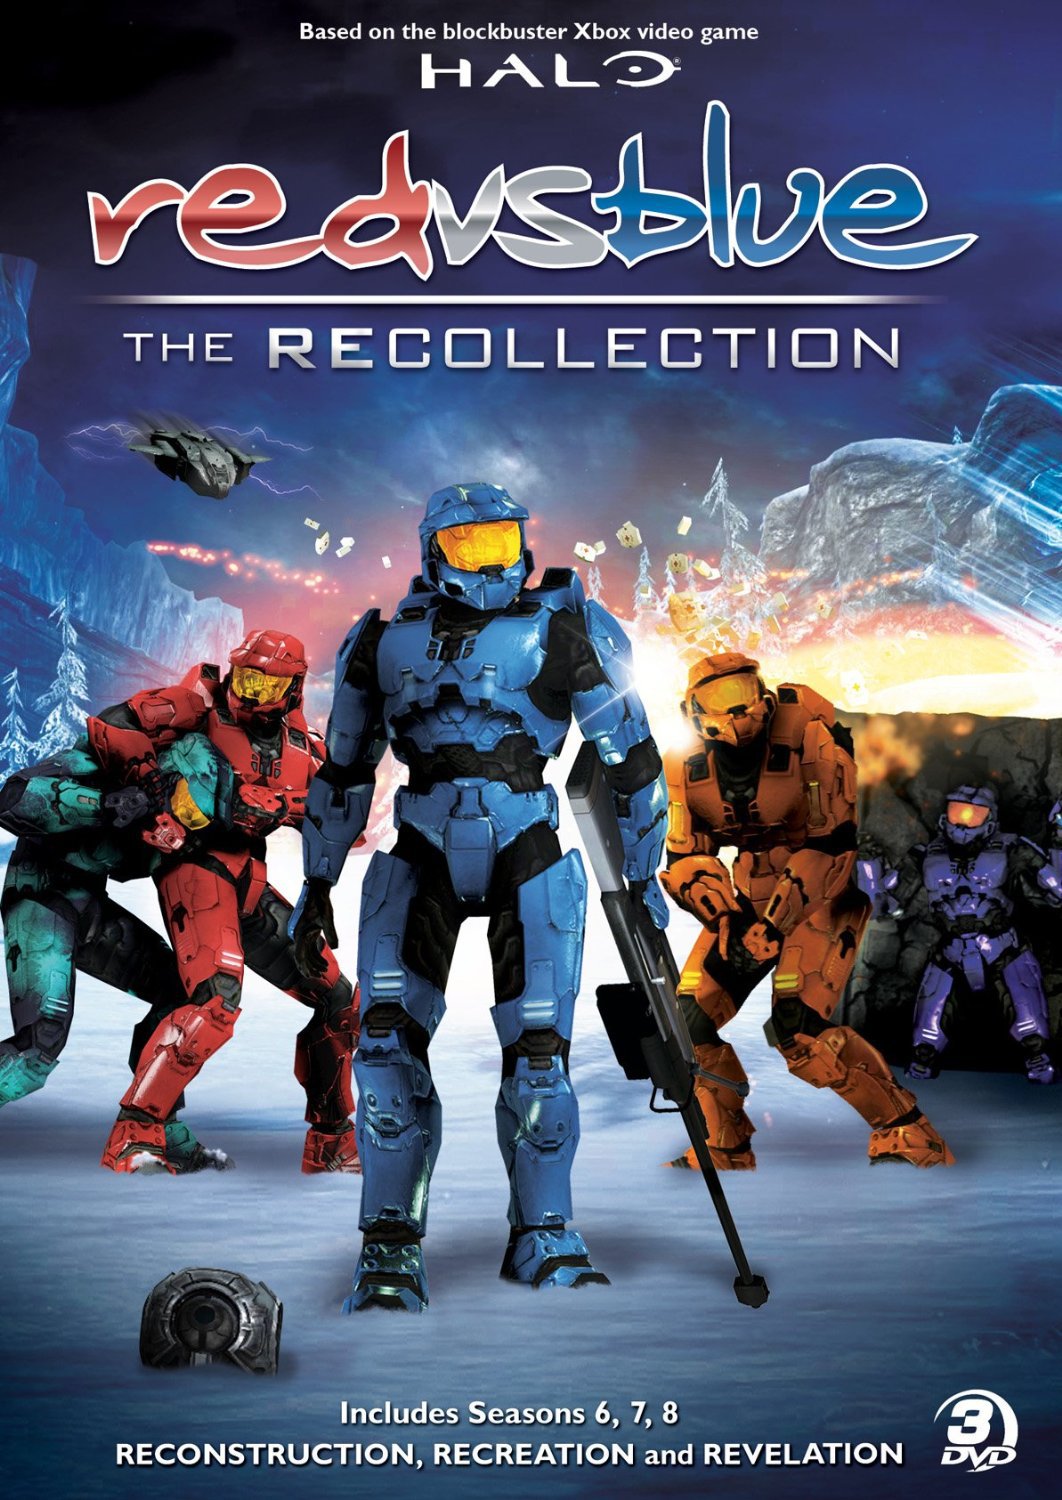 Red vs Blue: The Recollection